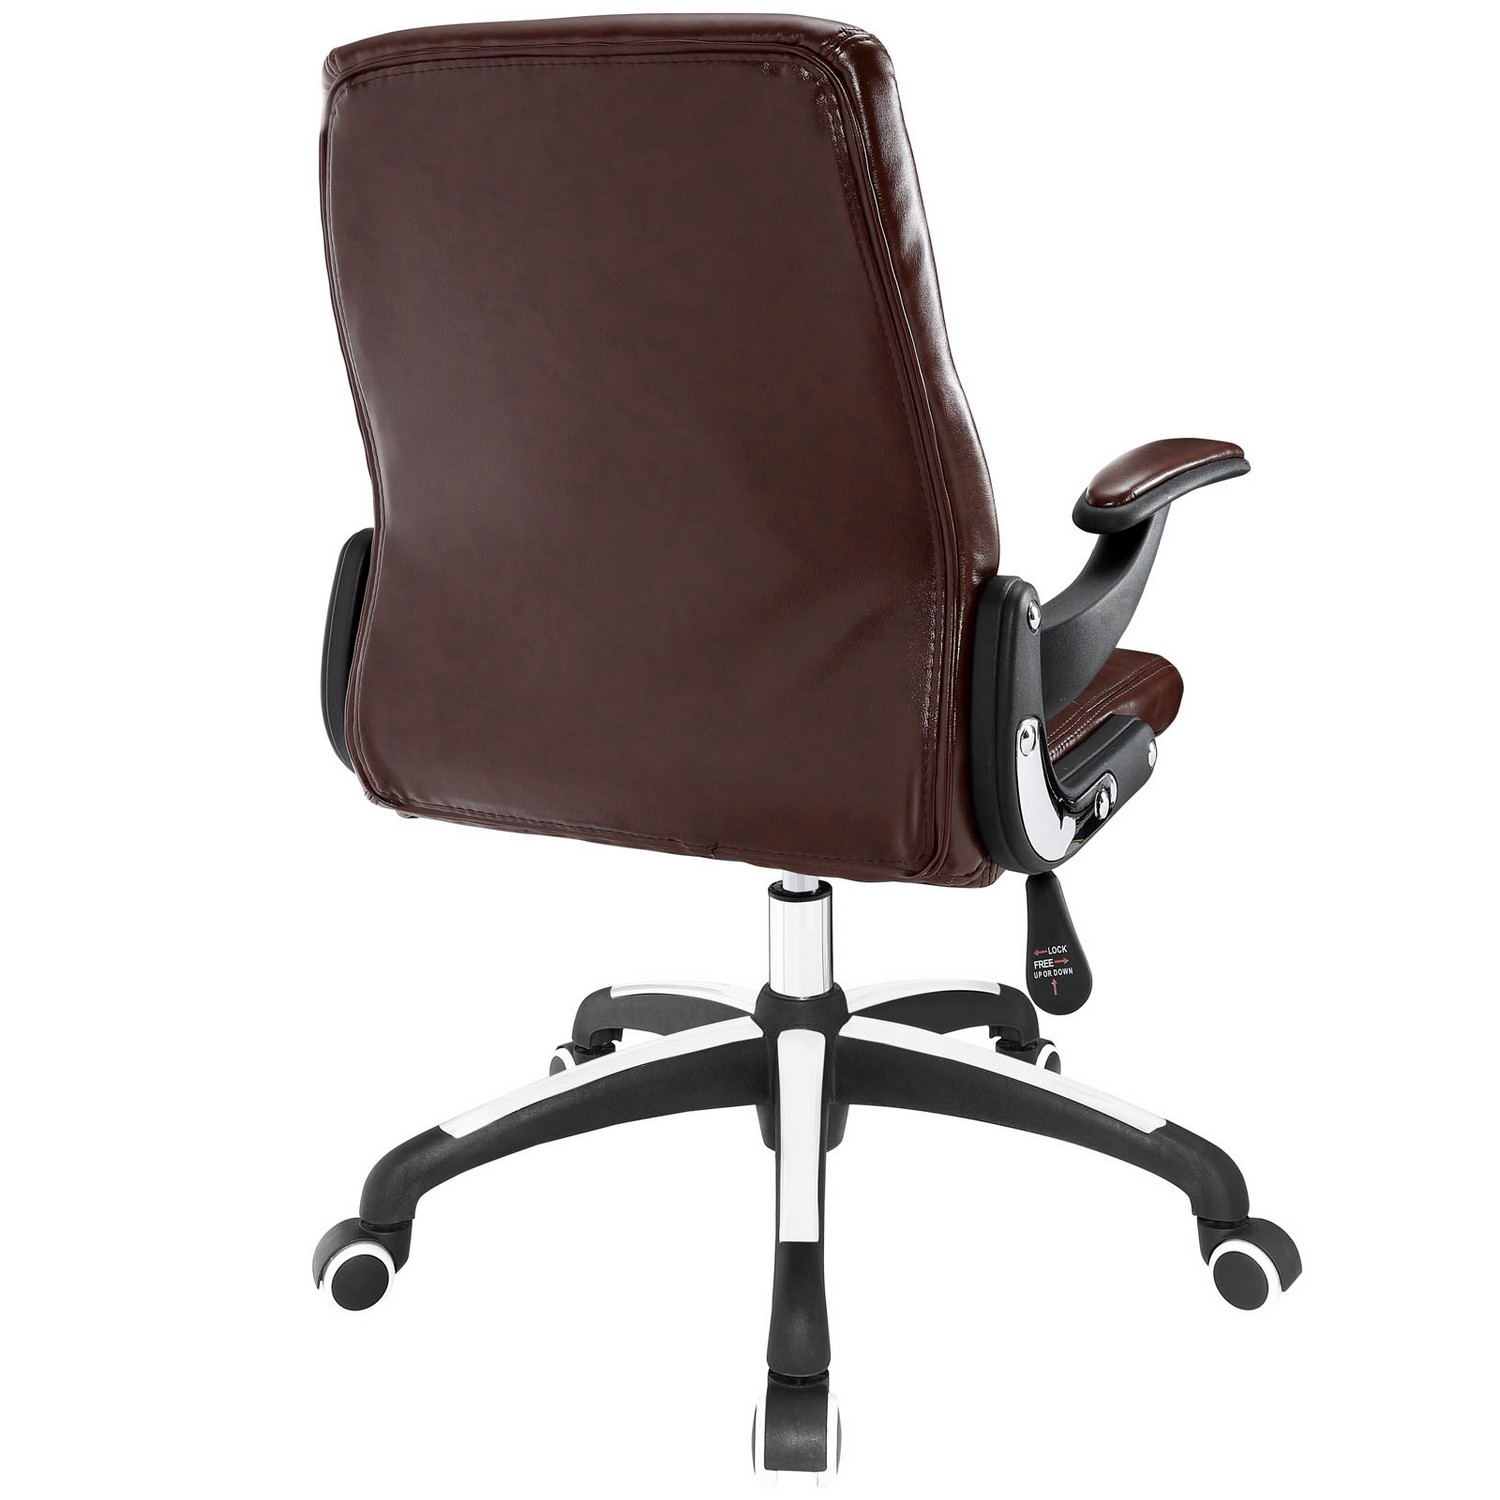 Modway Premier Highback Office Chair - Brown